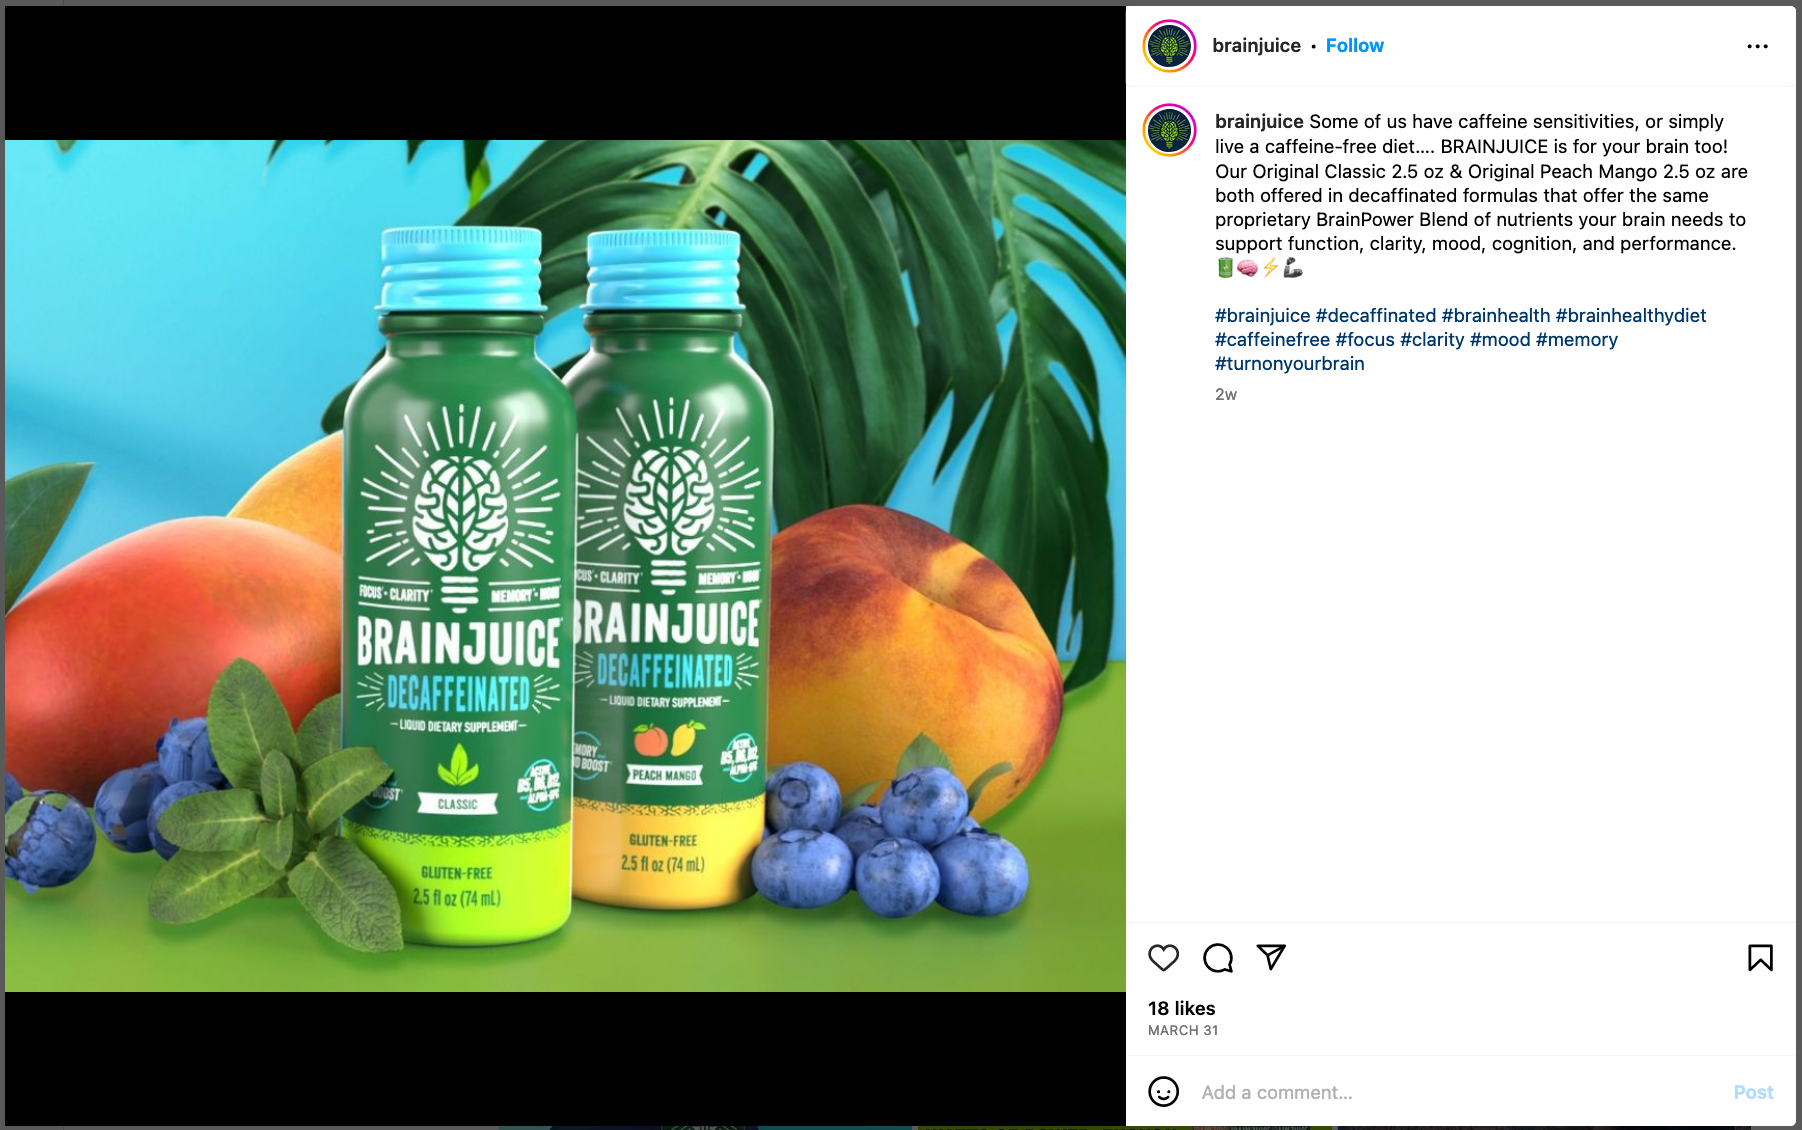 https://truthinadvertising.org/wp-content/uploads/2023/04/Brain-Juice-Instagram-Decaf-products.png